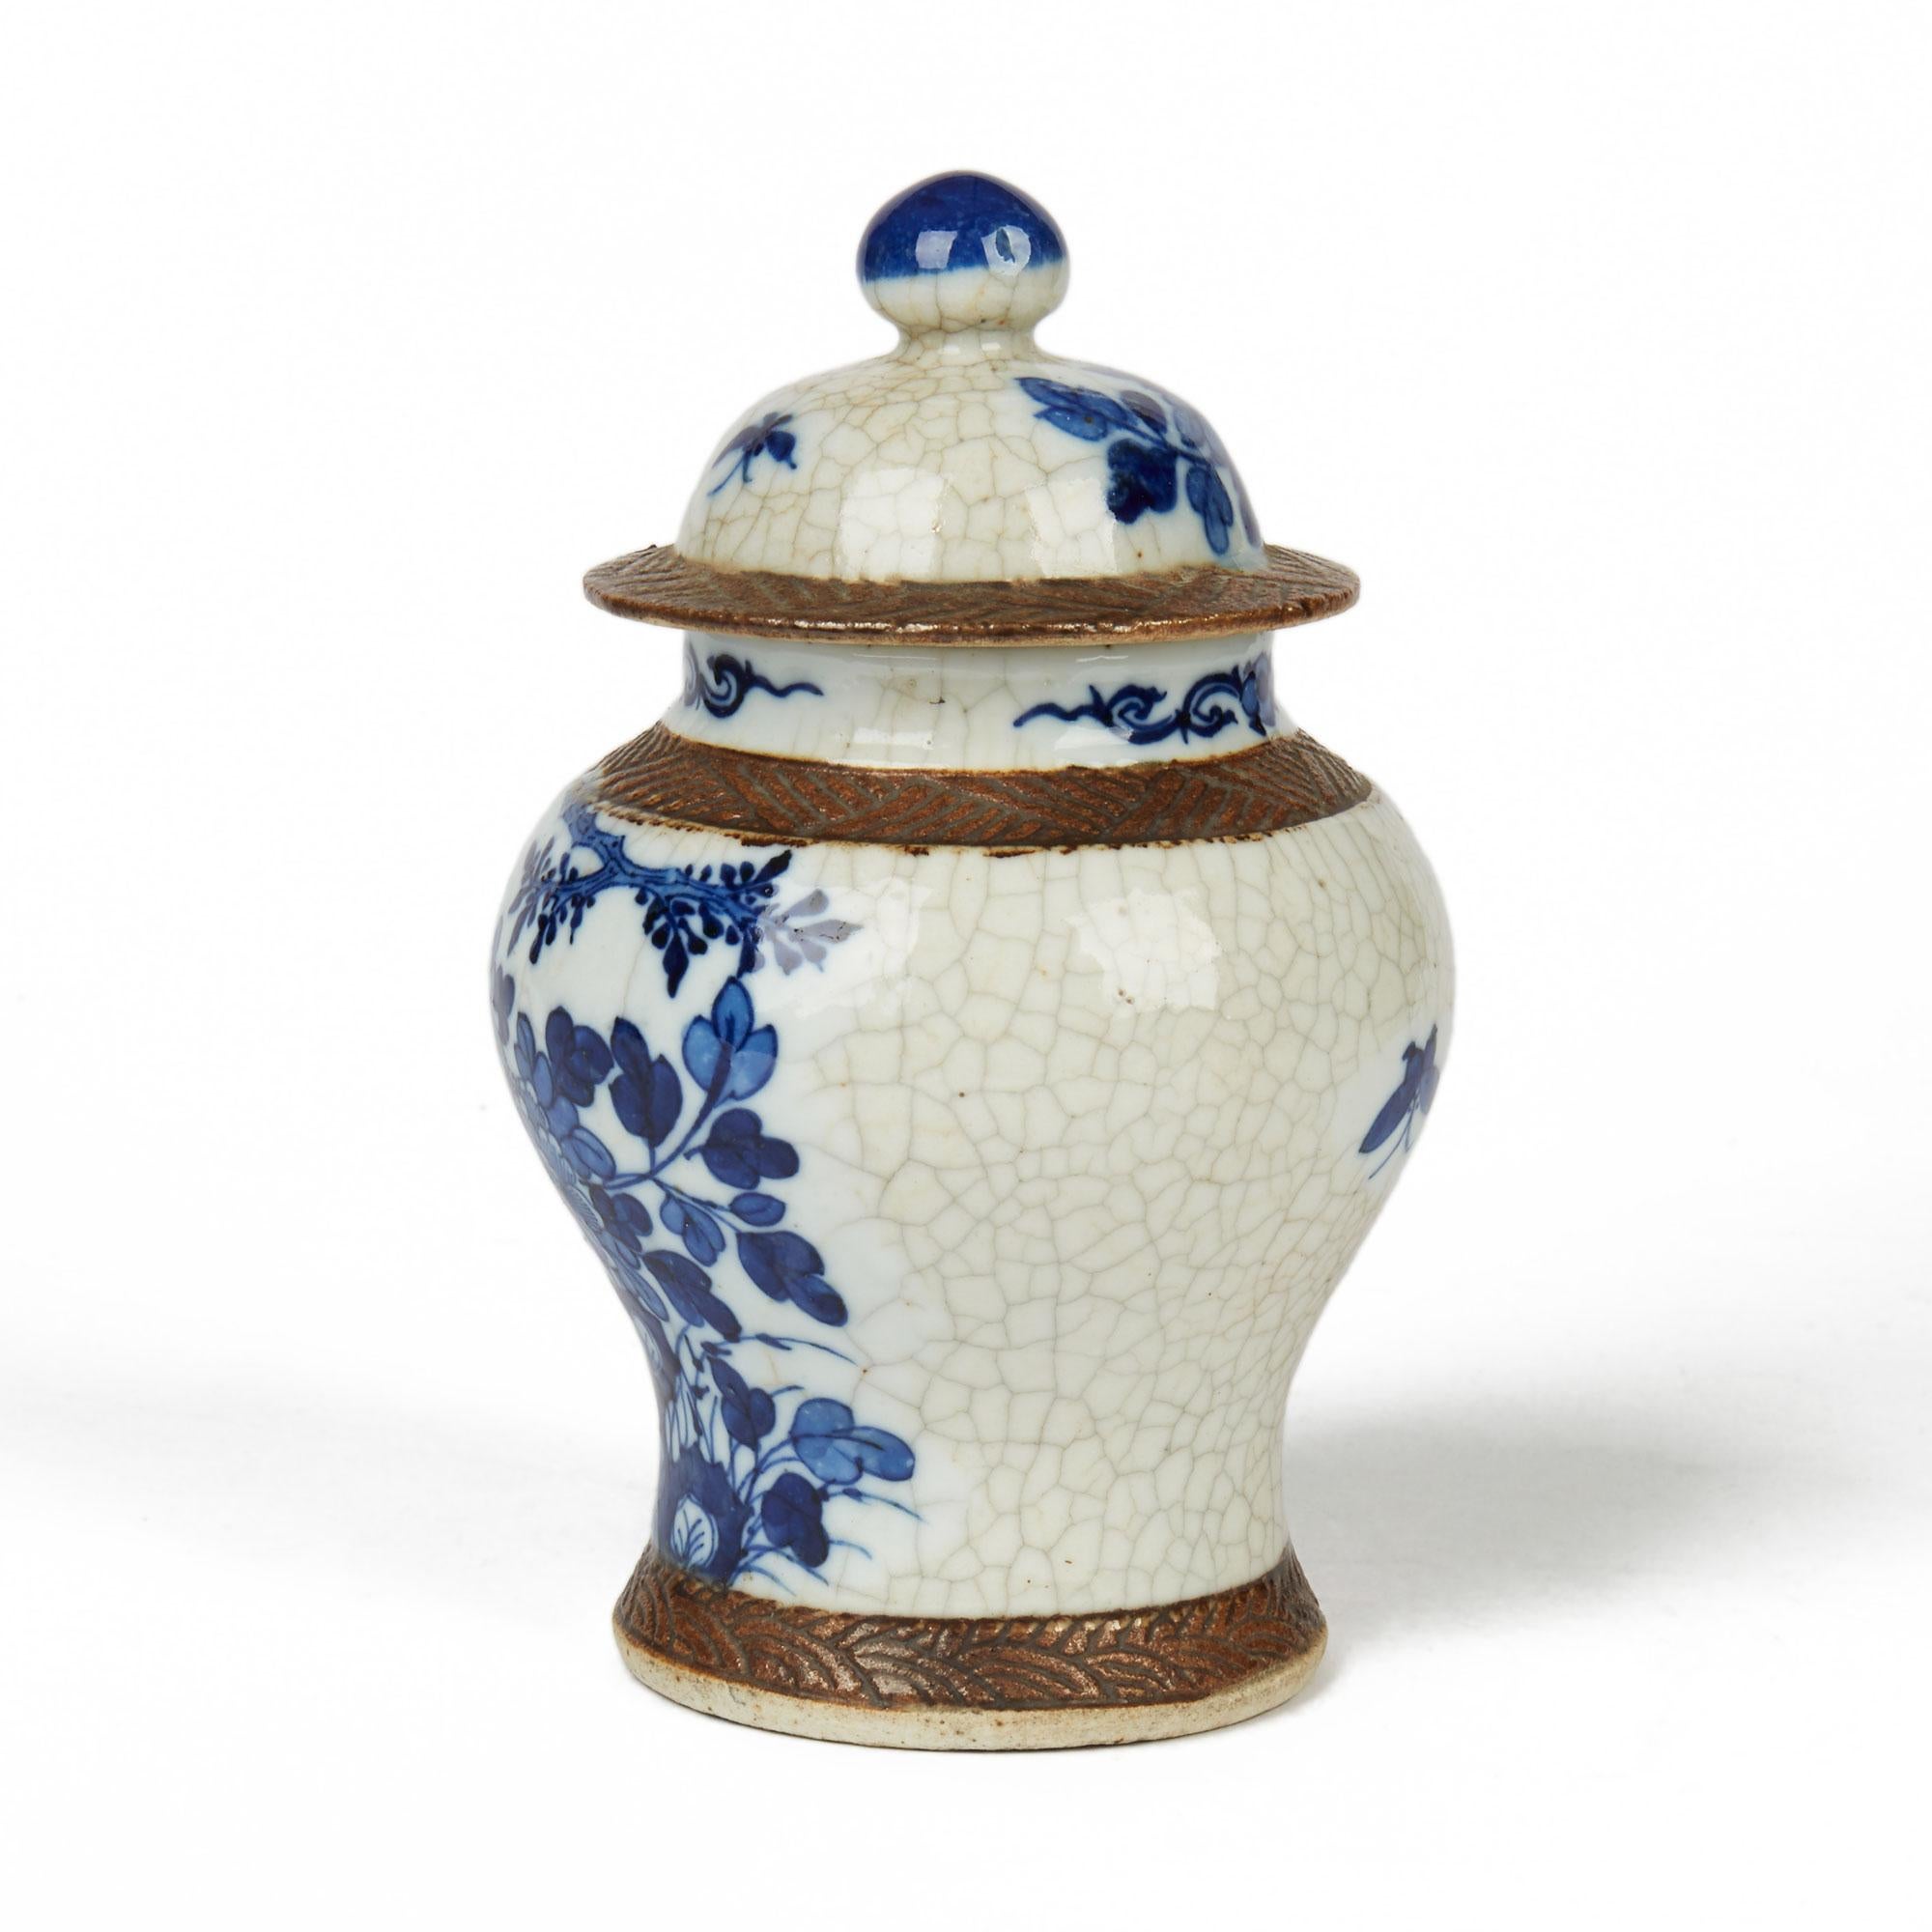 A very fine antique Chinese porcelain lidded ginger jar of rounded bulbous shape with hat shaped cover painted in blue and white with a tree and flowering shrubs on a cracquel ground and with matted brown patterned banding around the edges. The jar